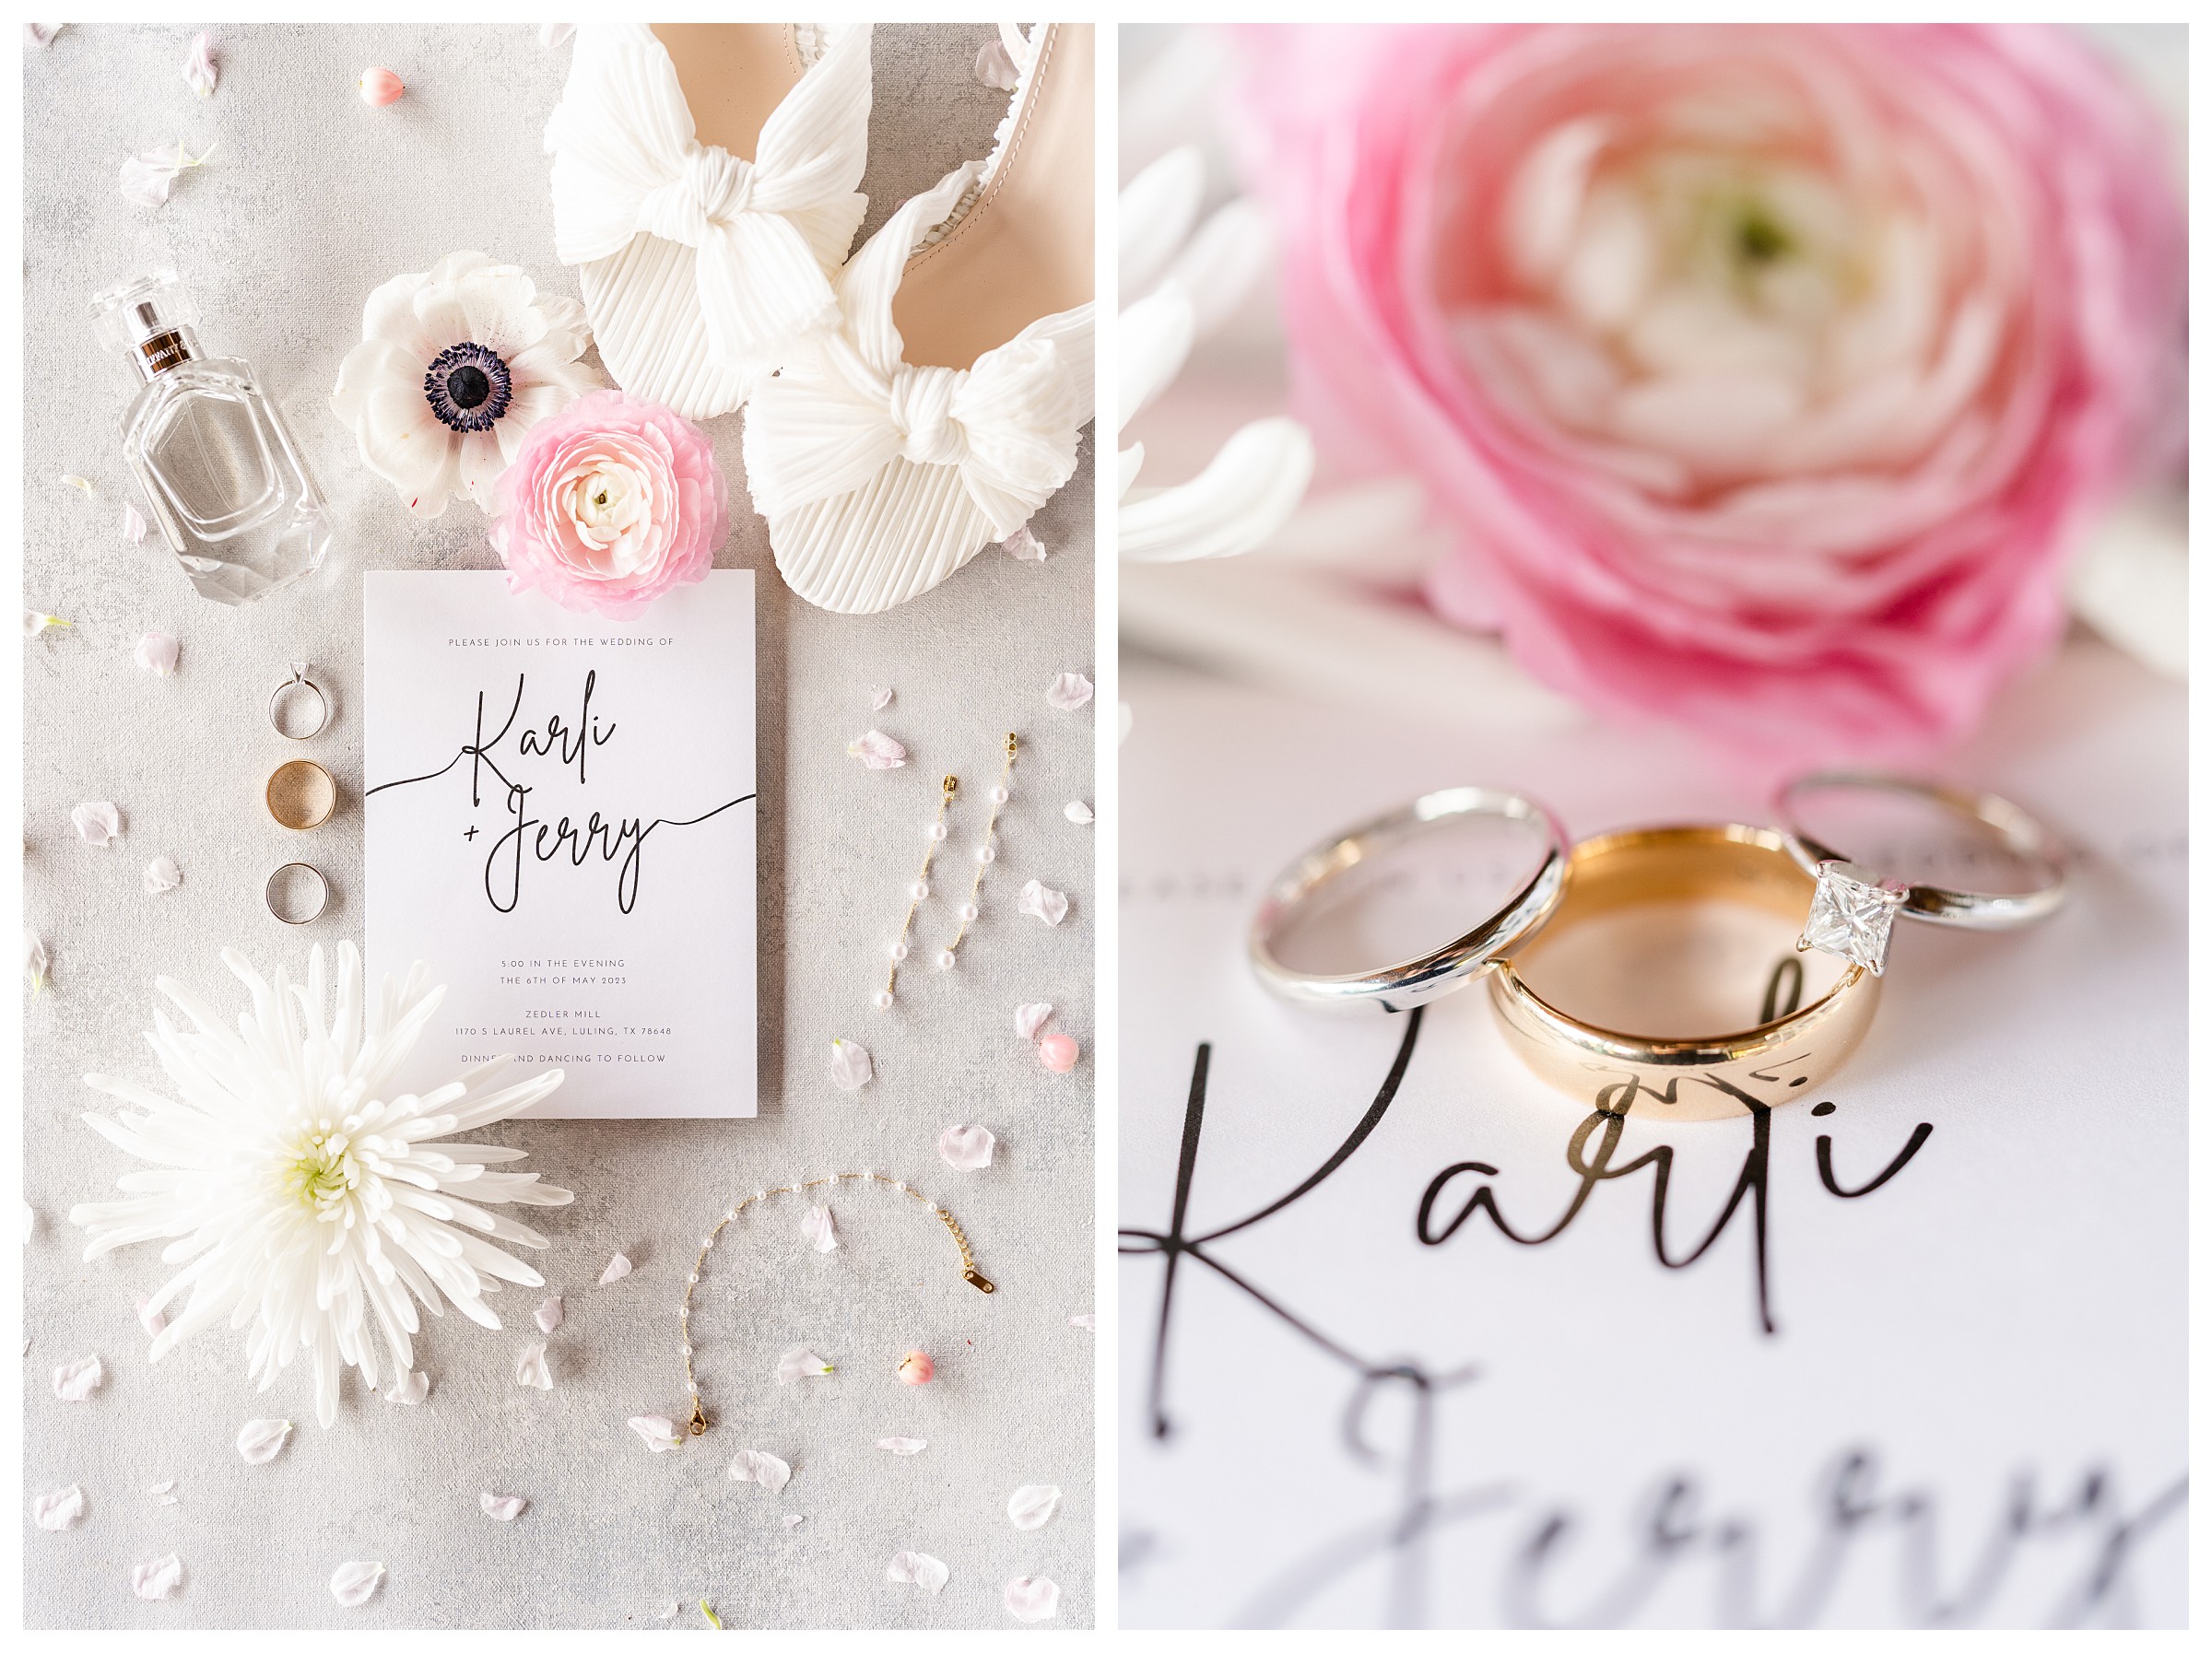 First image is a flat lay of invitation with flowers, bridal shoes, perfume, necklace, earrings and wedding rings and second image is wedding rings stacked on wedding invitation with flowers behind them.